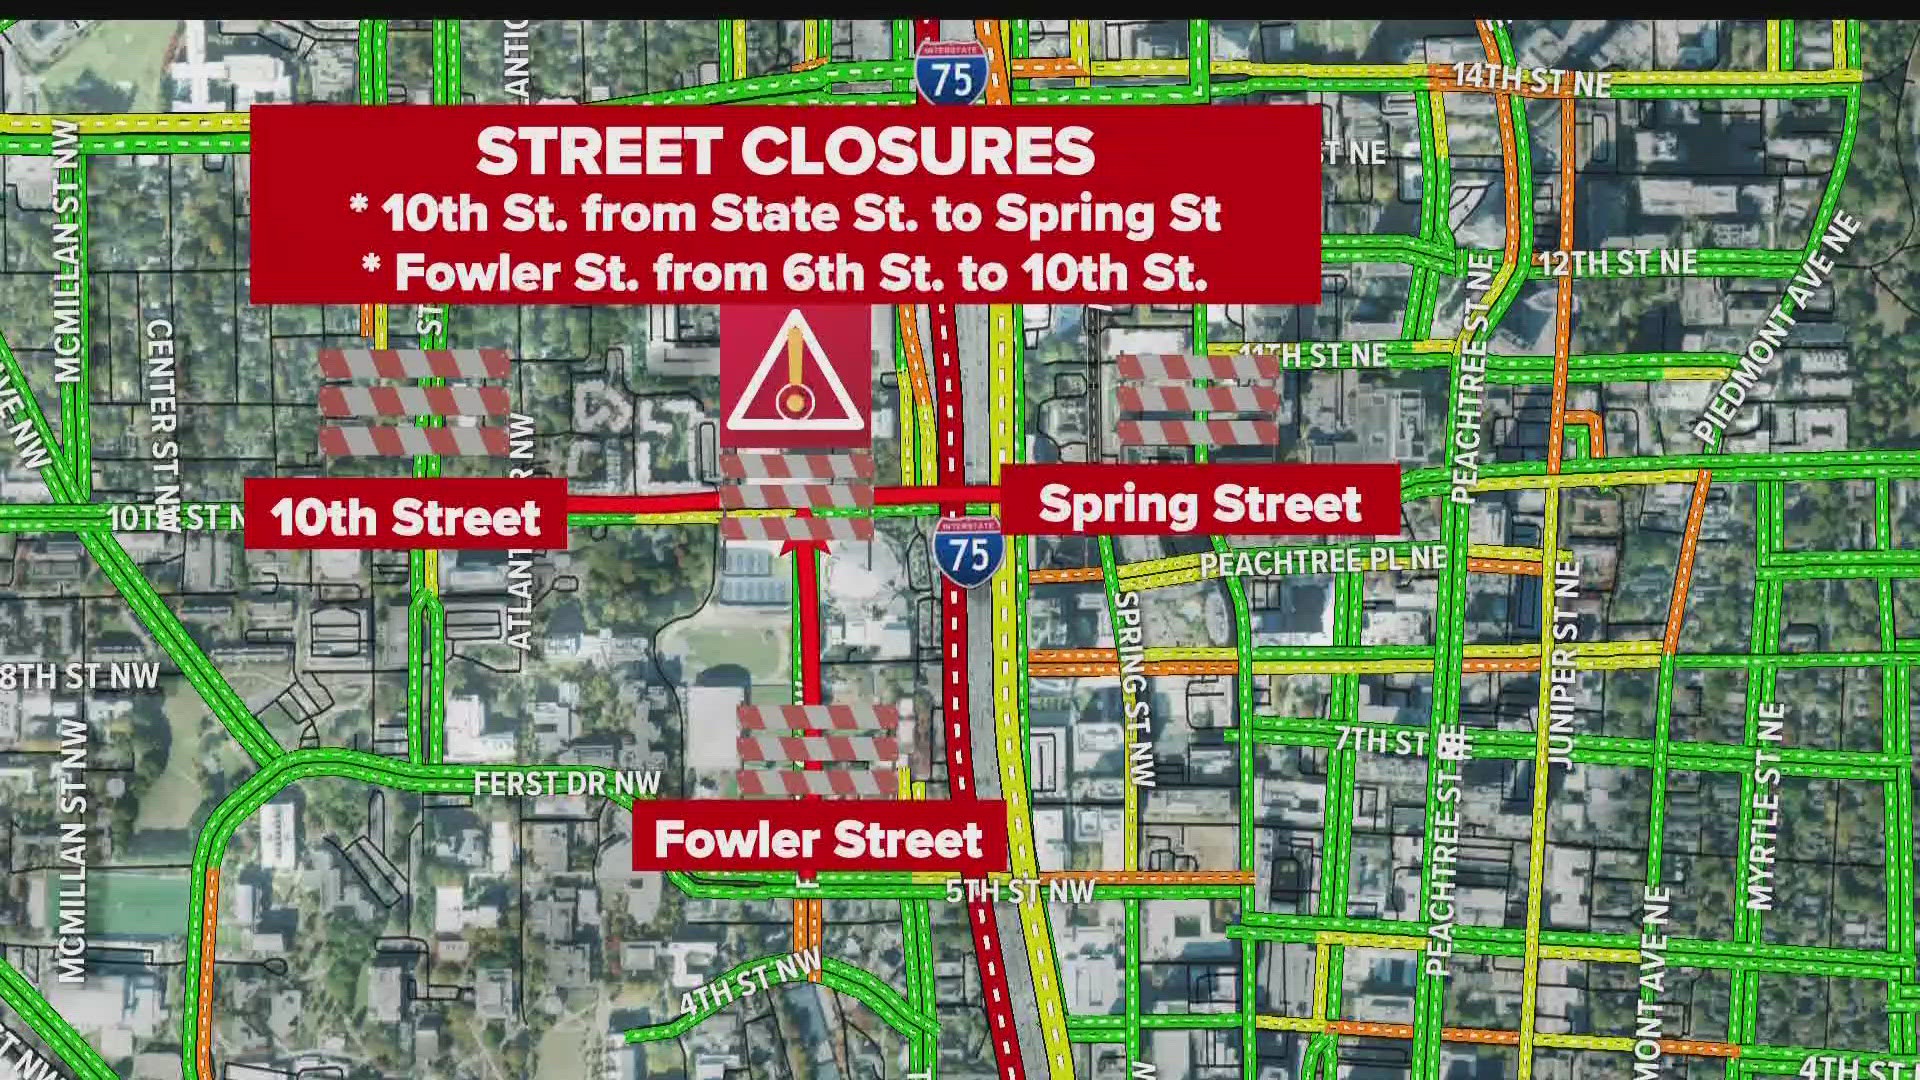 There will be road closures in the area that could impact your commute.